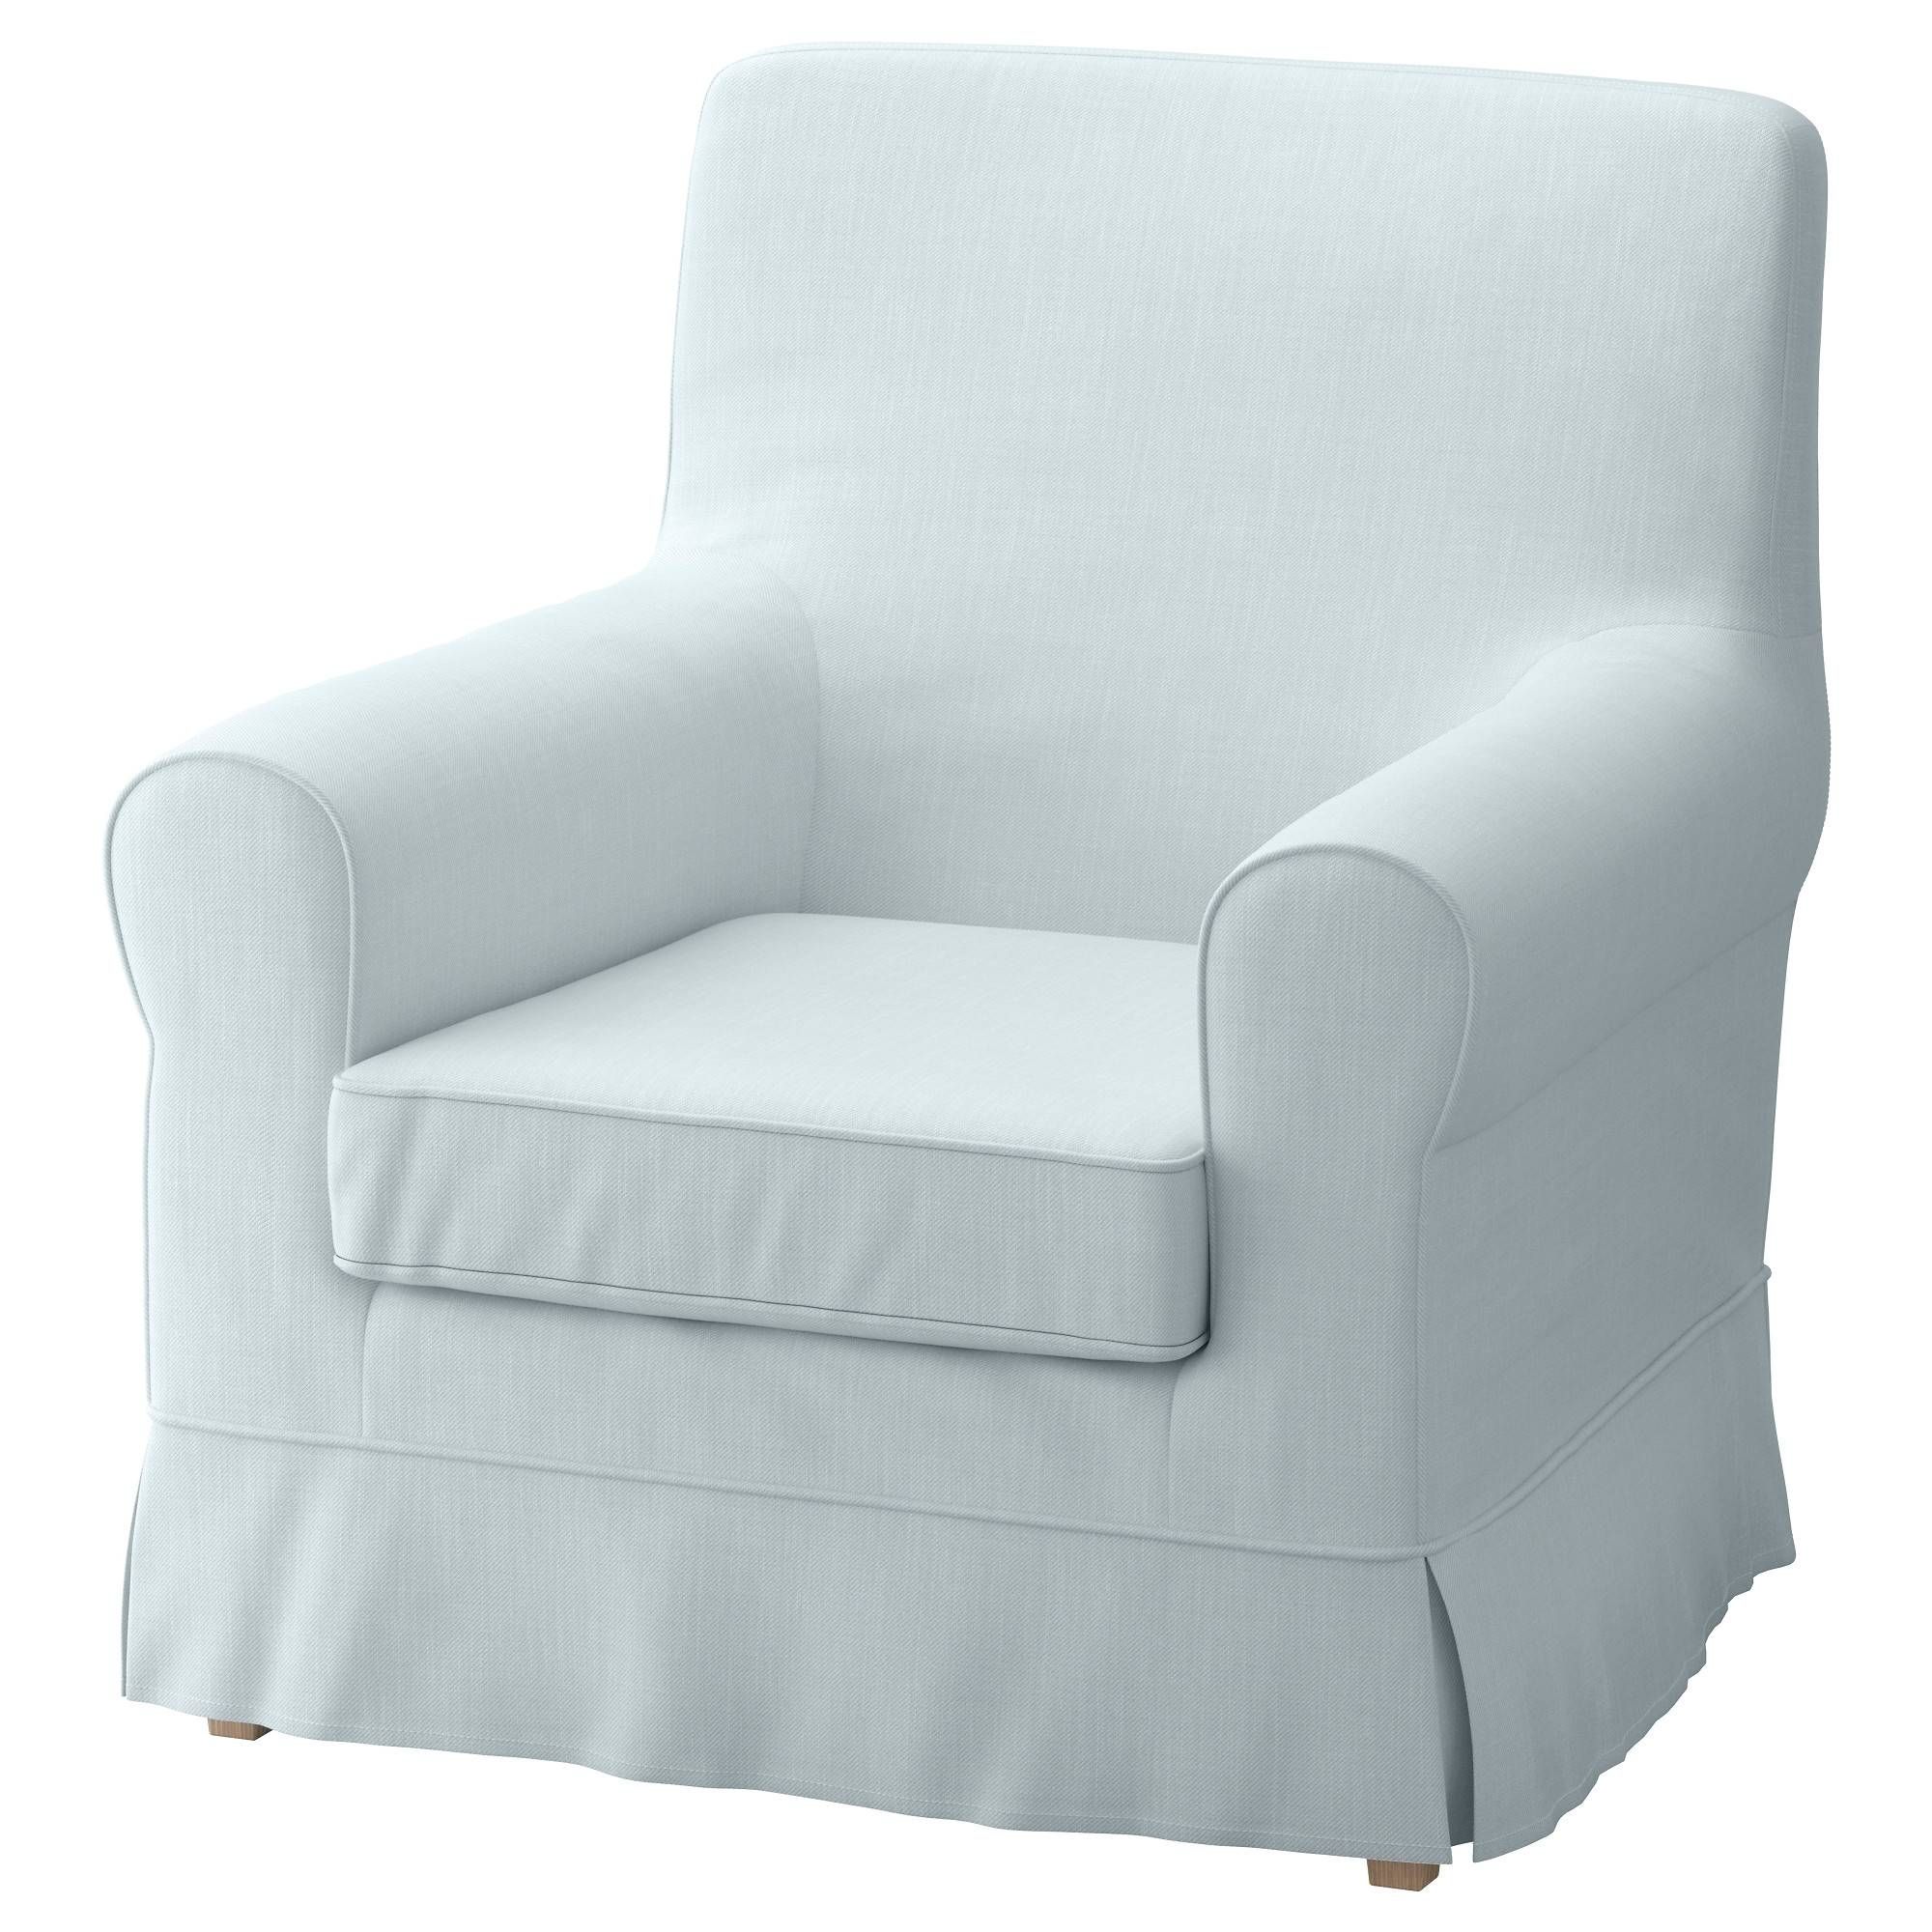 Armchairs – Traditional & Modern – Ikea For Small Armchairs (View 16 of 30)